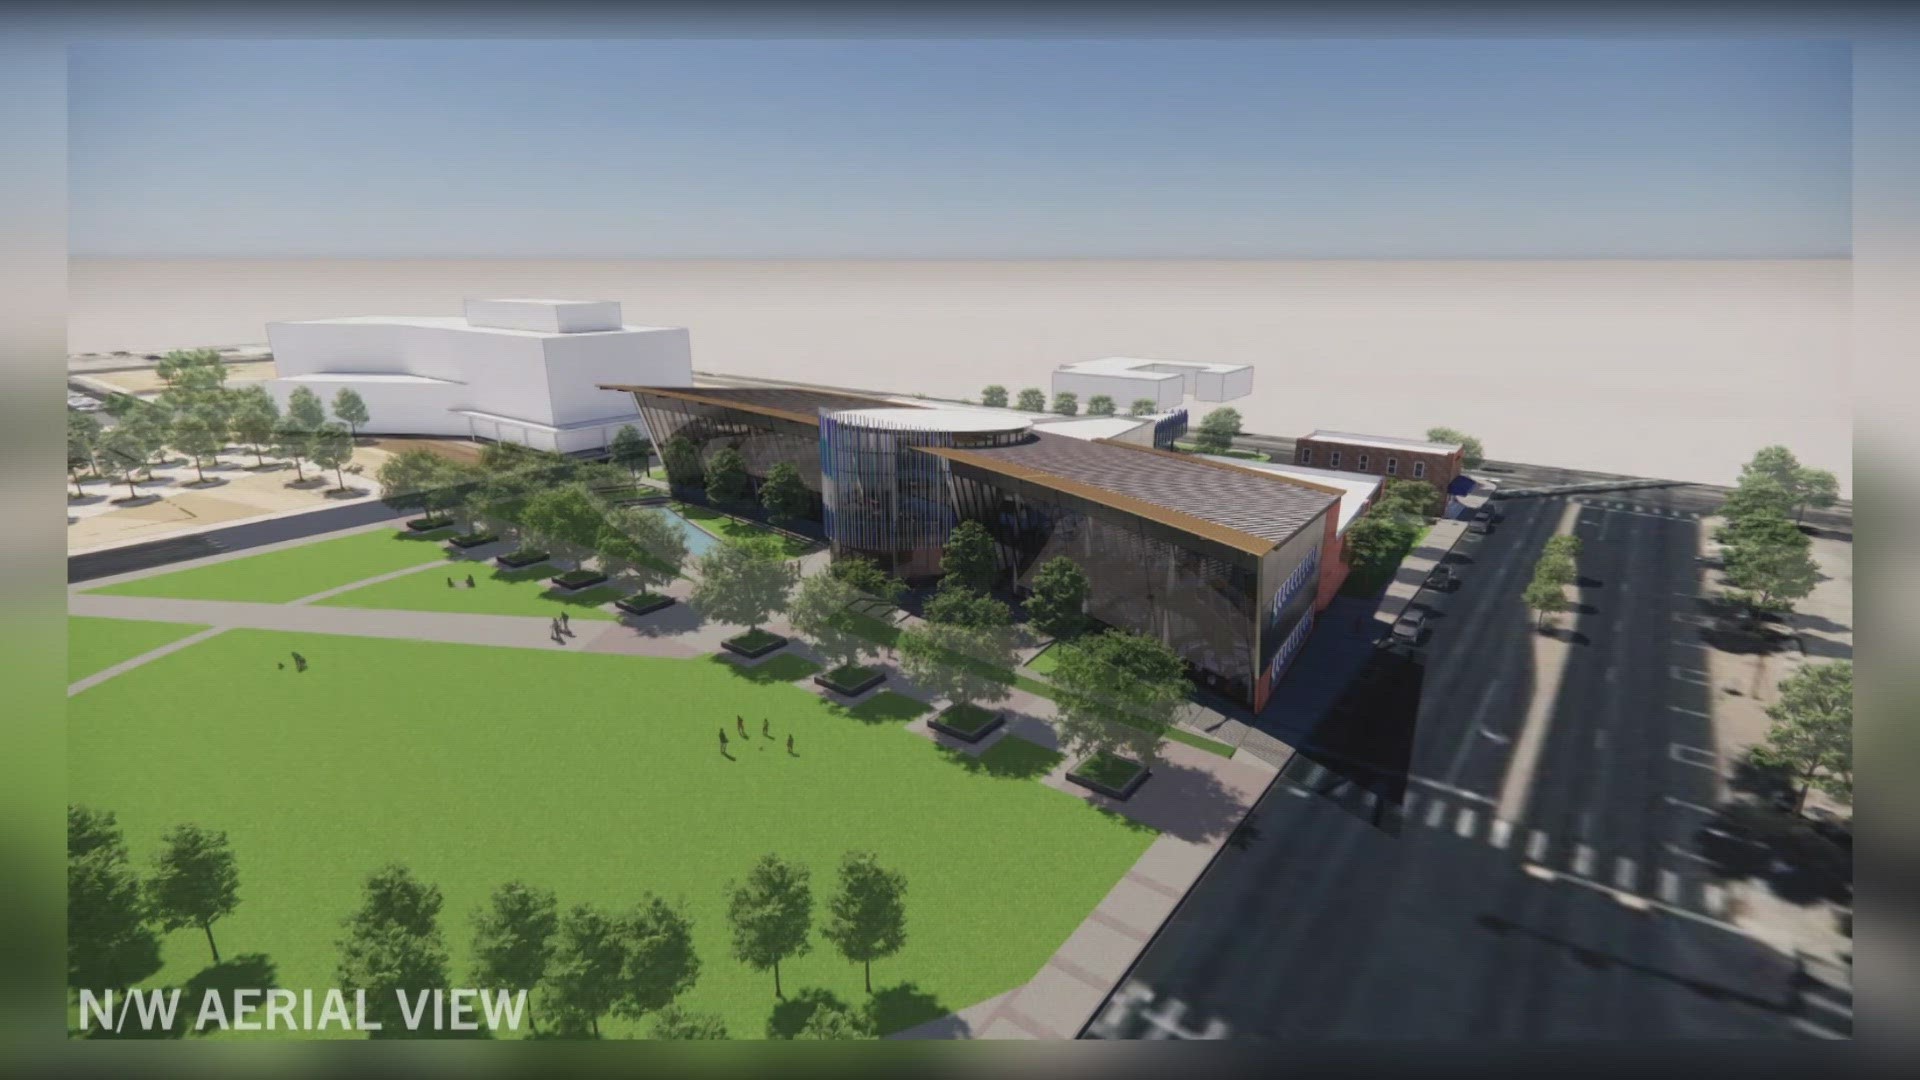 The Ector County Library is expected to open in January of 2027.